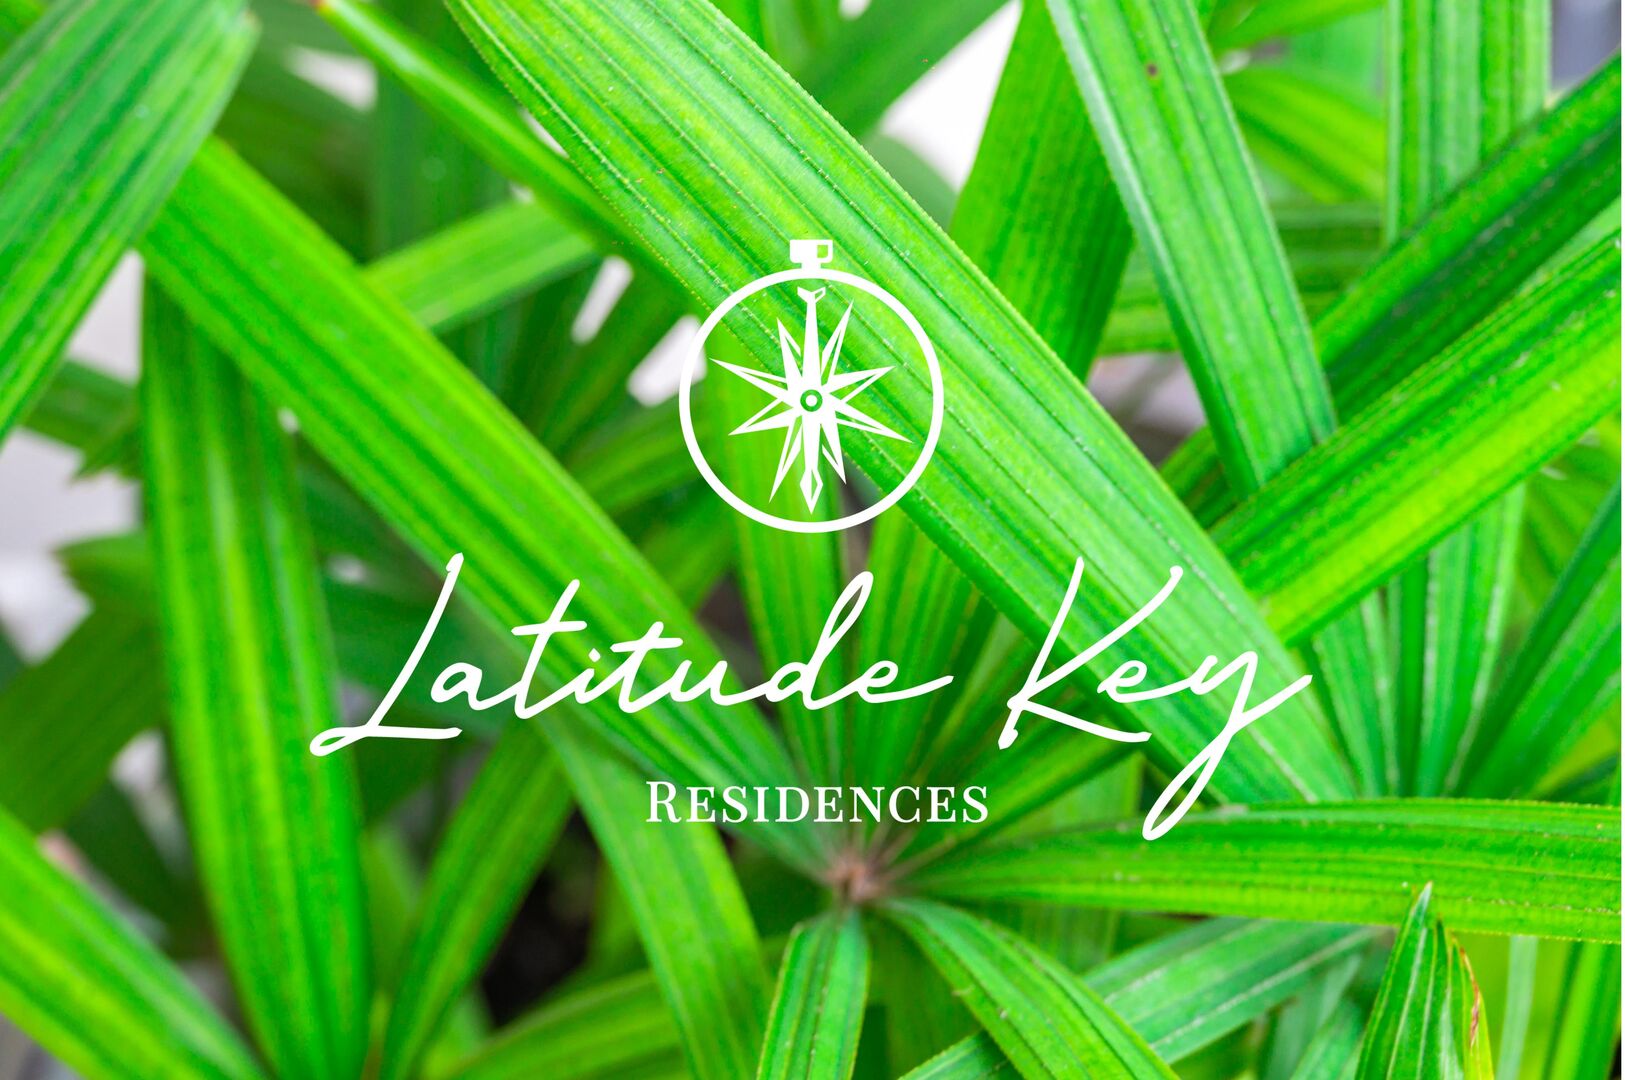 Harbor Key is part of the Residences Collection. 
Enjoy a stress free vacation with Latitude Key - Curated Vacation Properties.